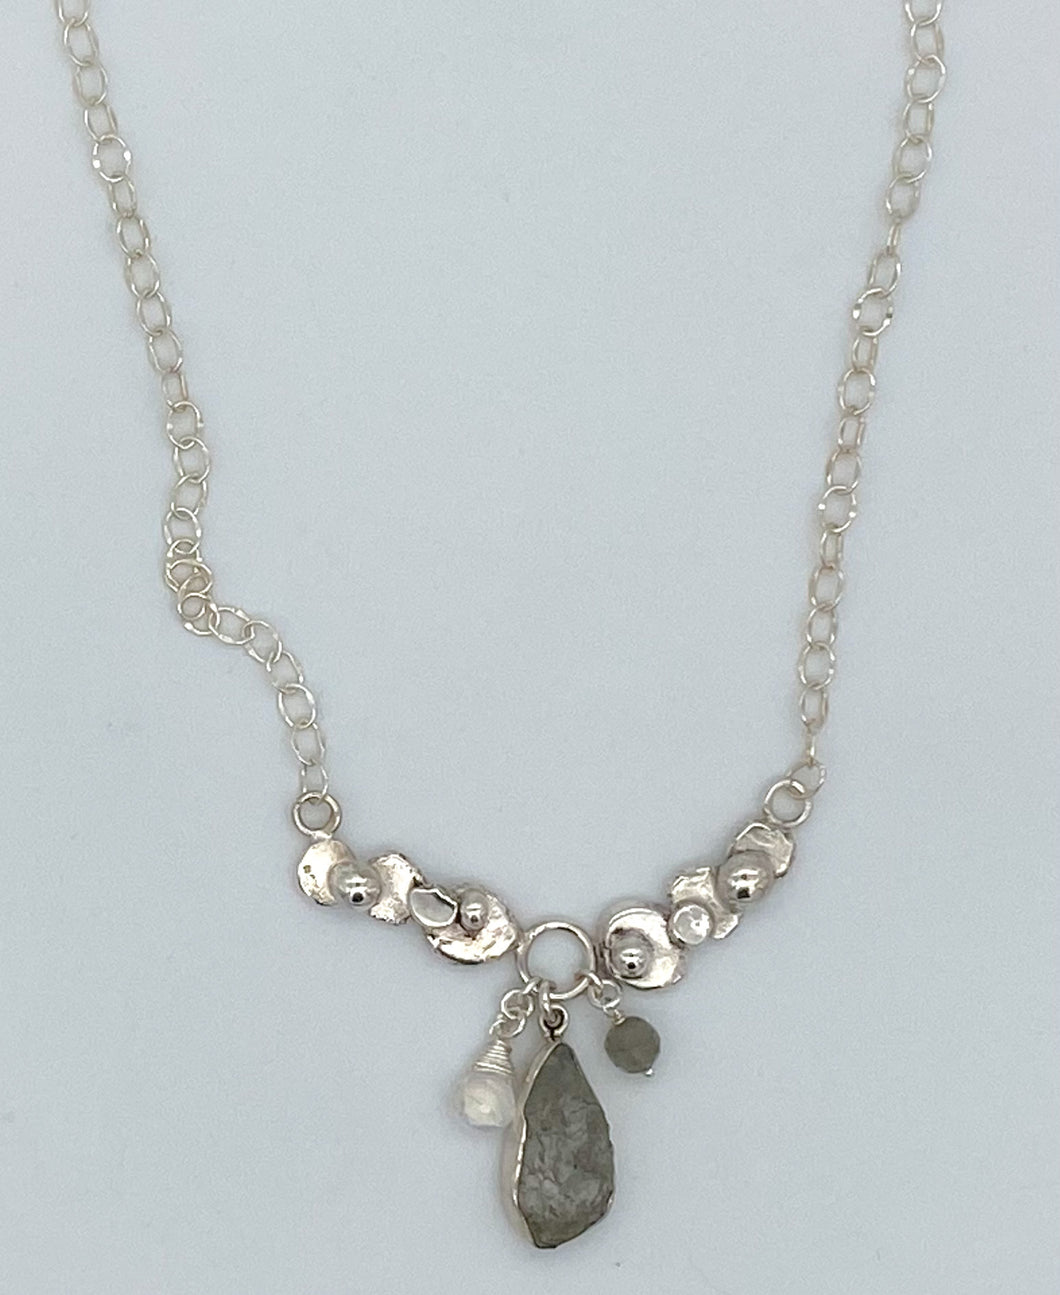 Moss aquamarine, rainbow moonstone, labradorite, and recycled silver necklace